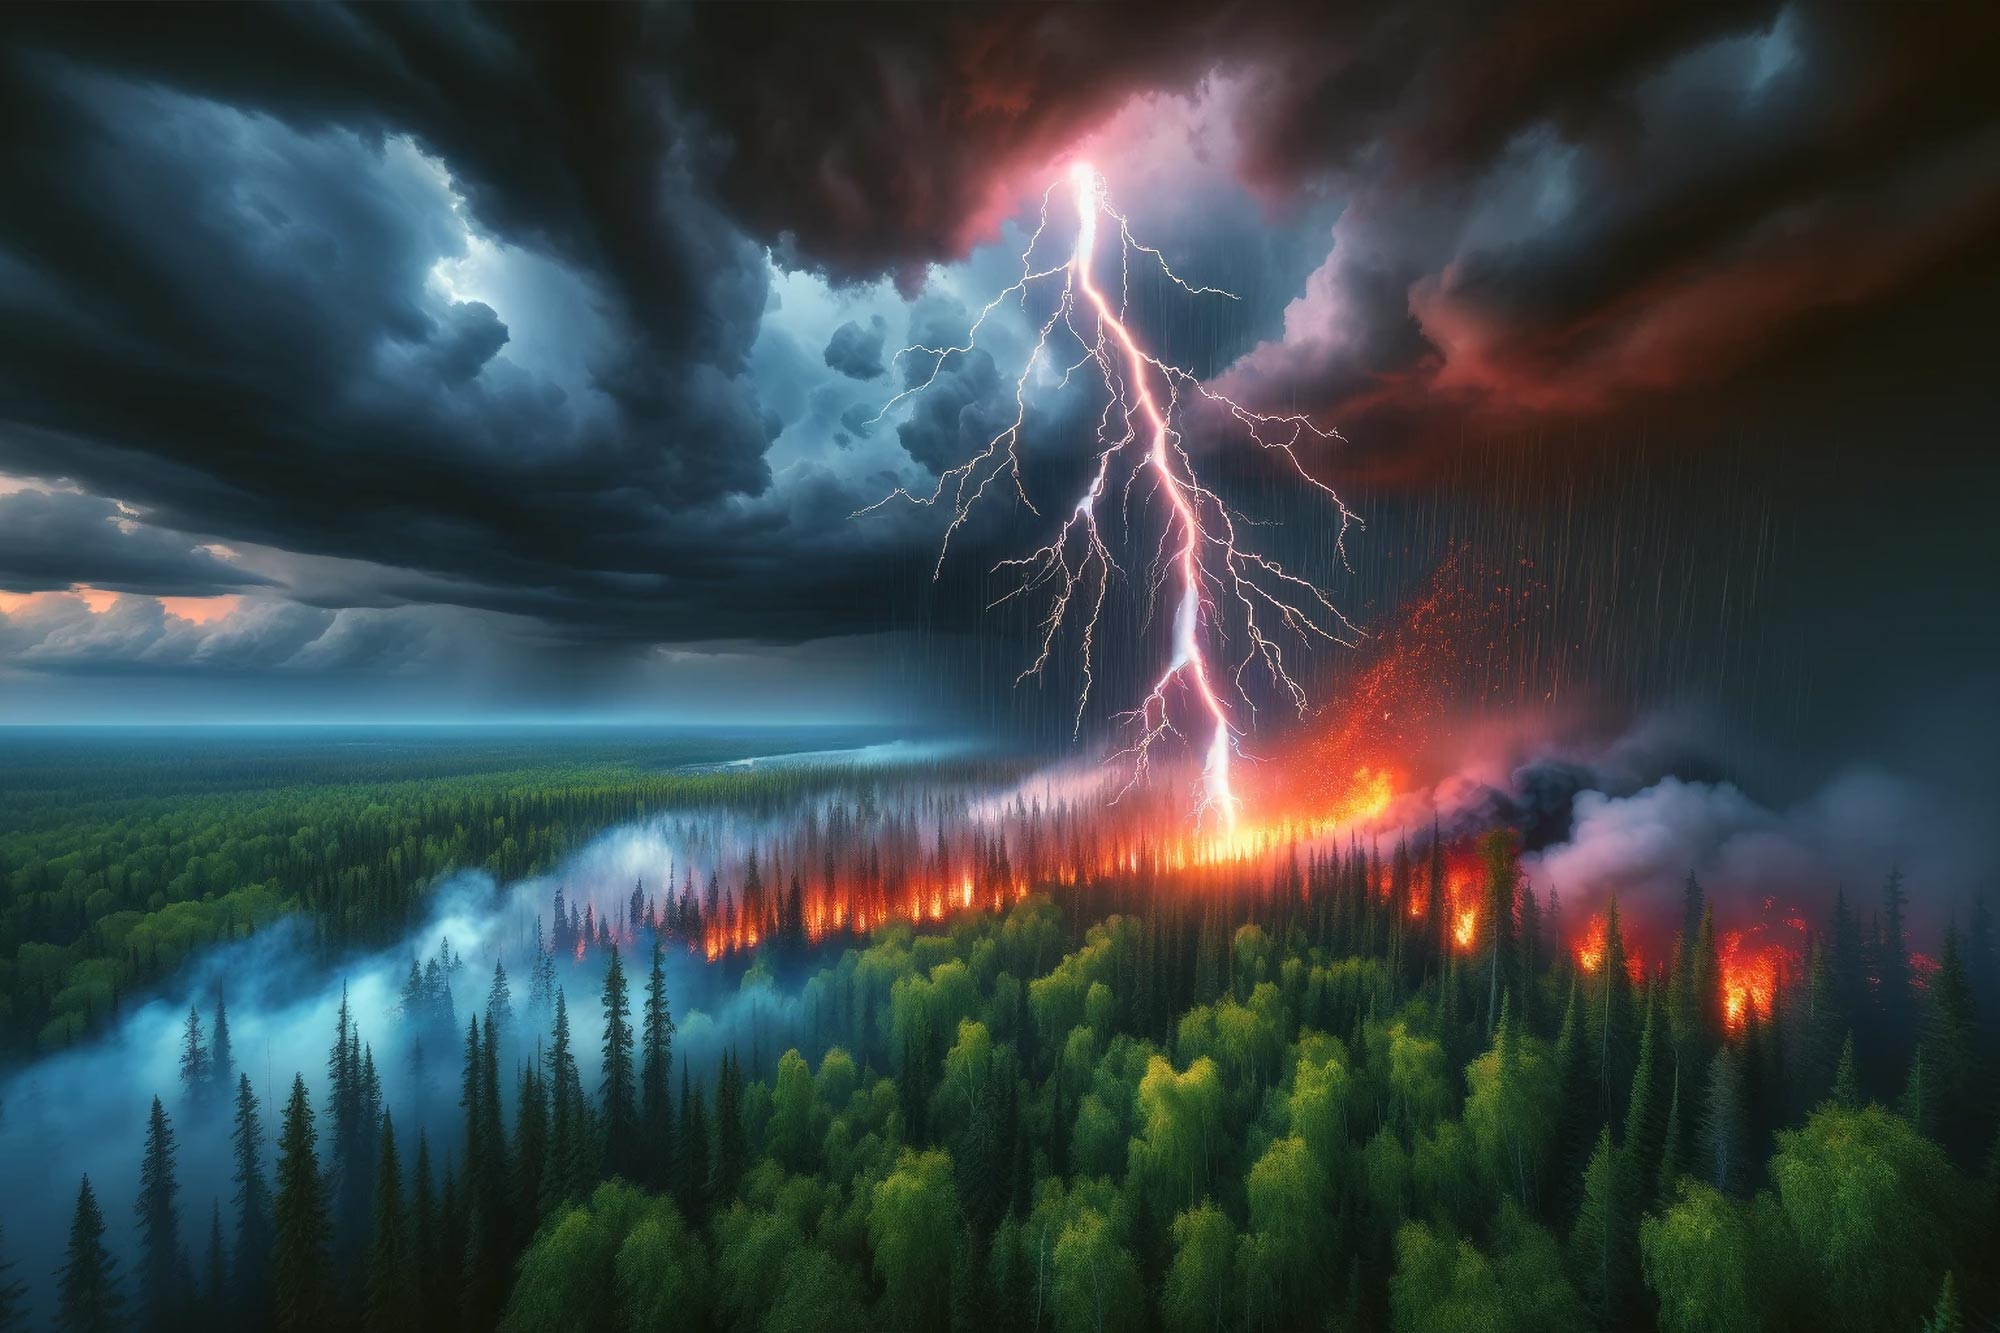 Lightning-Induced Wildfires Threaten Crucial Carbon Storage